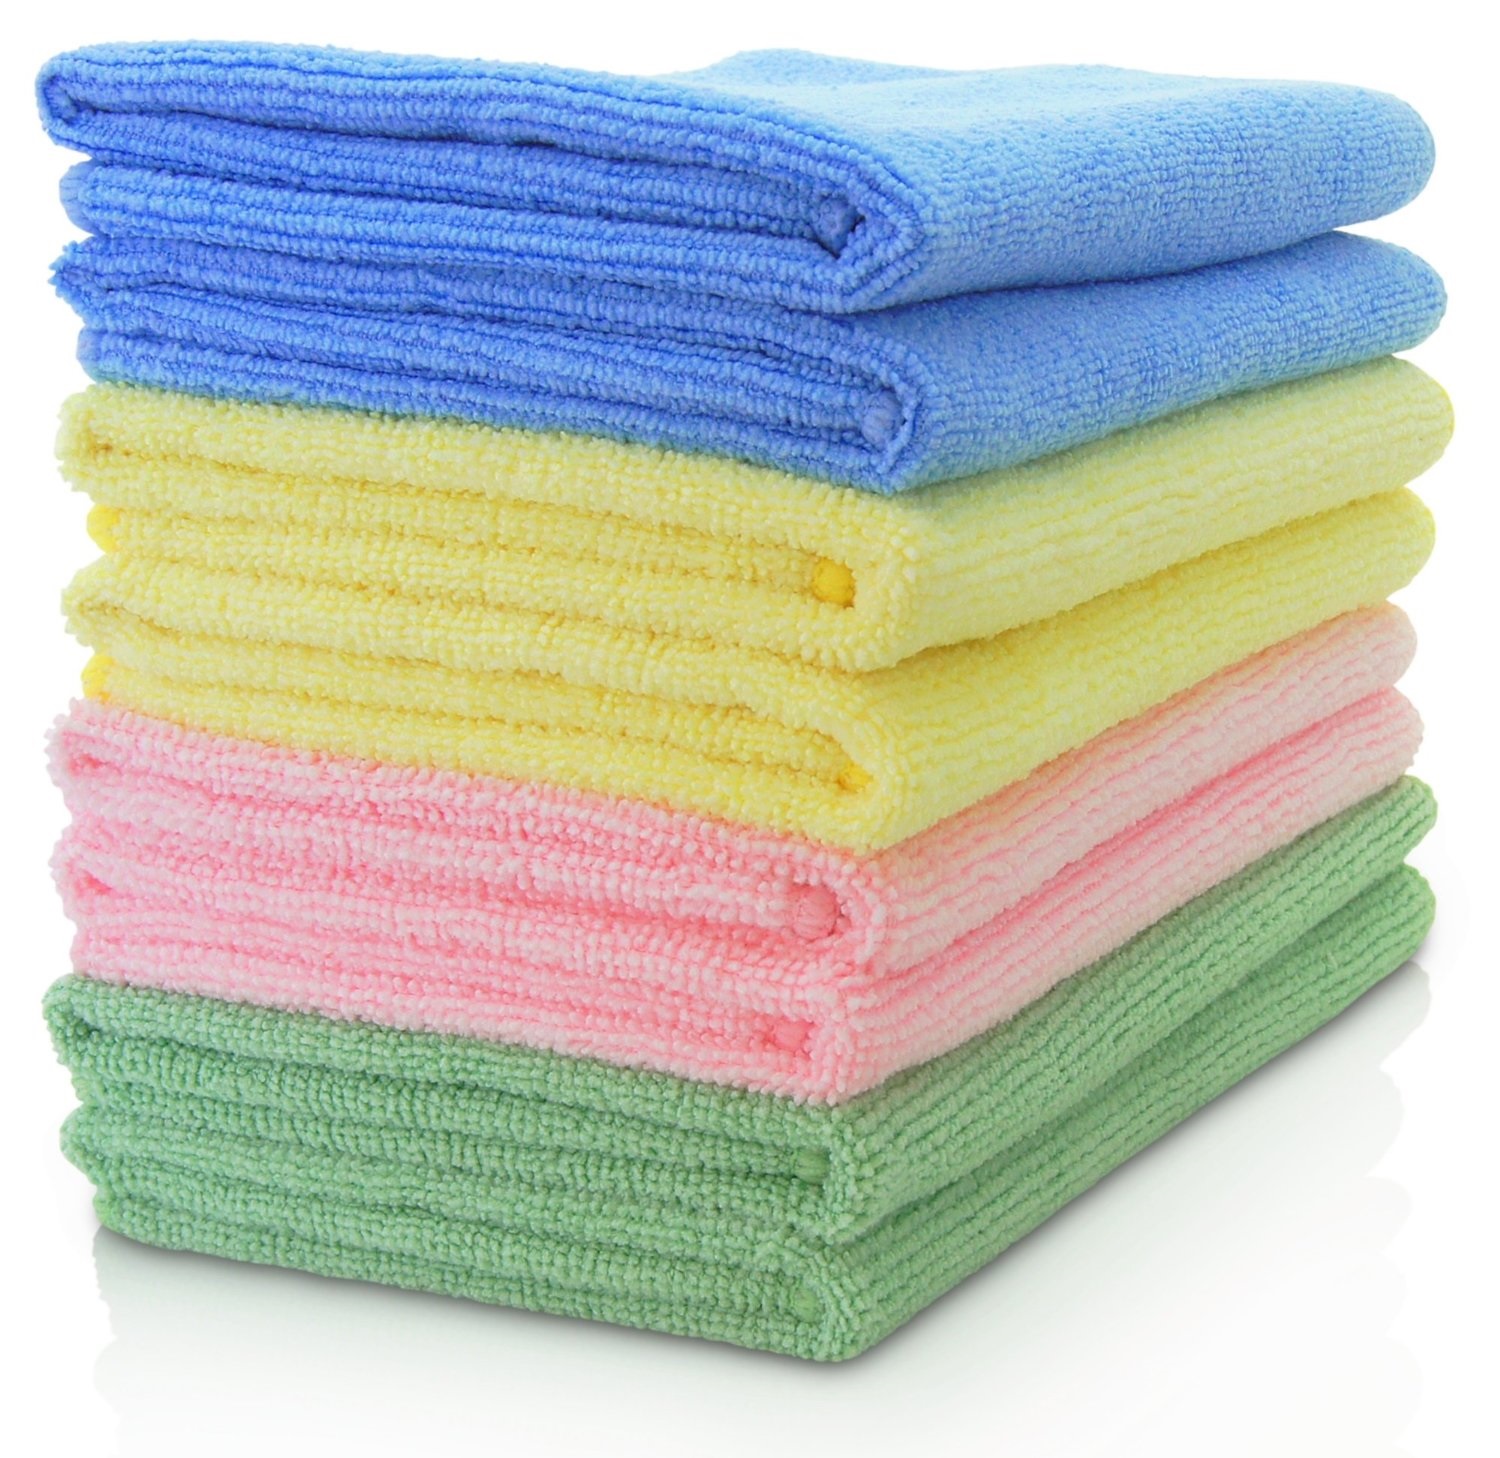 https://www.thewipeshop.co.uk/images/microfiber%20cloths%20blue-yellow-green-red.jpg